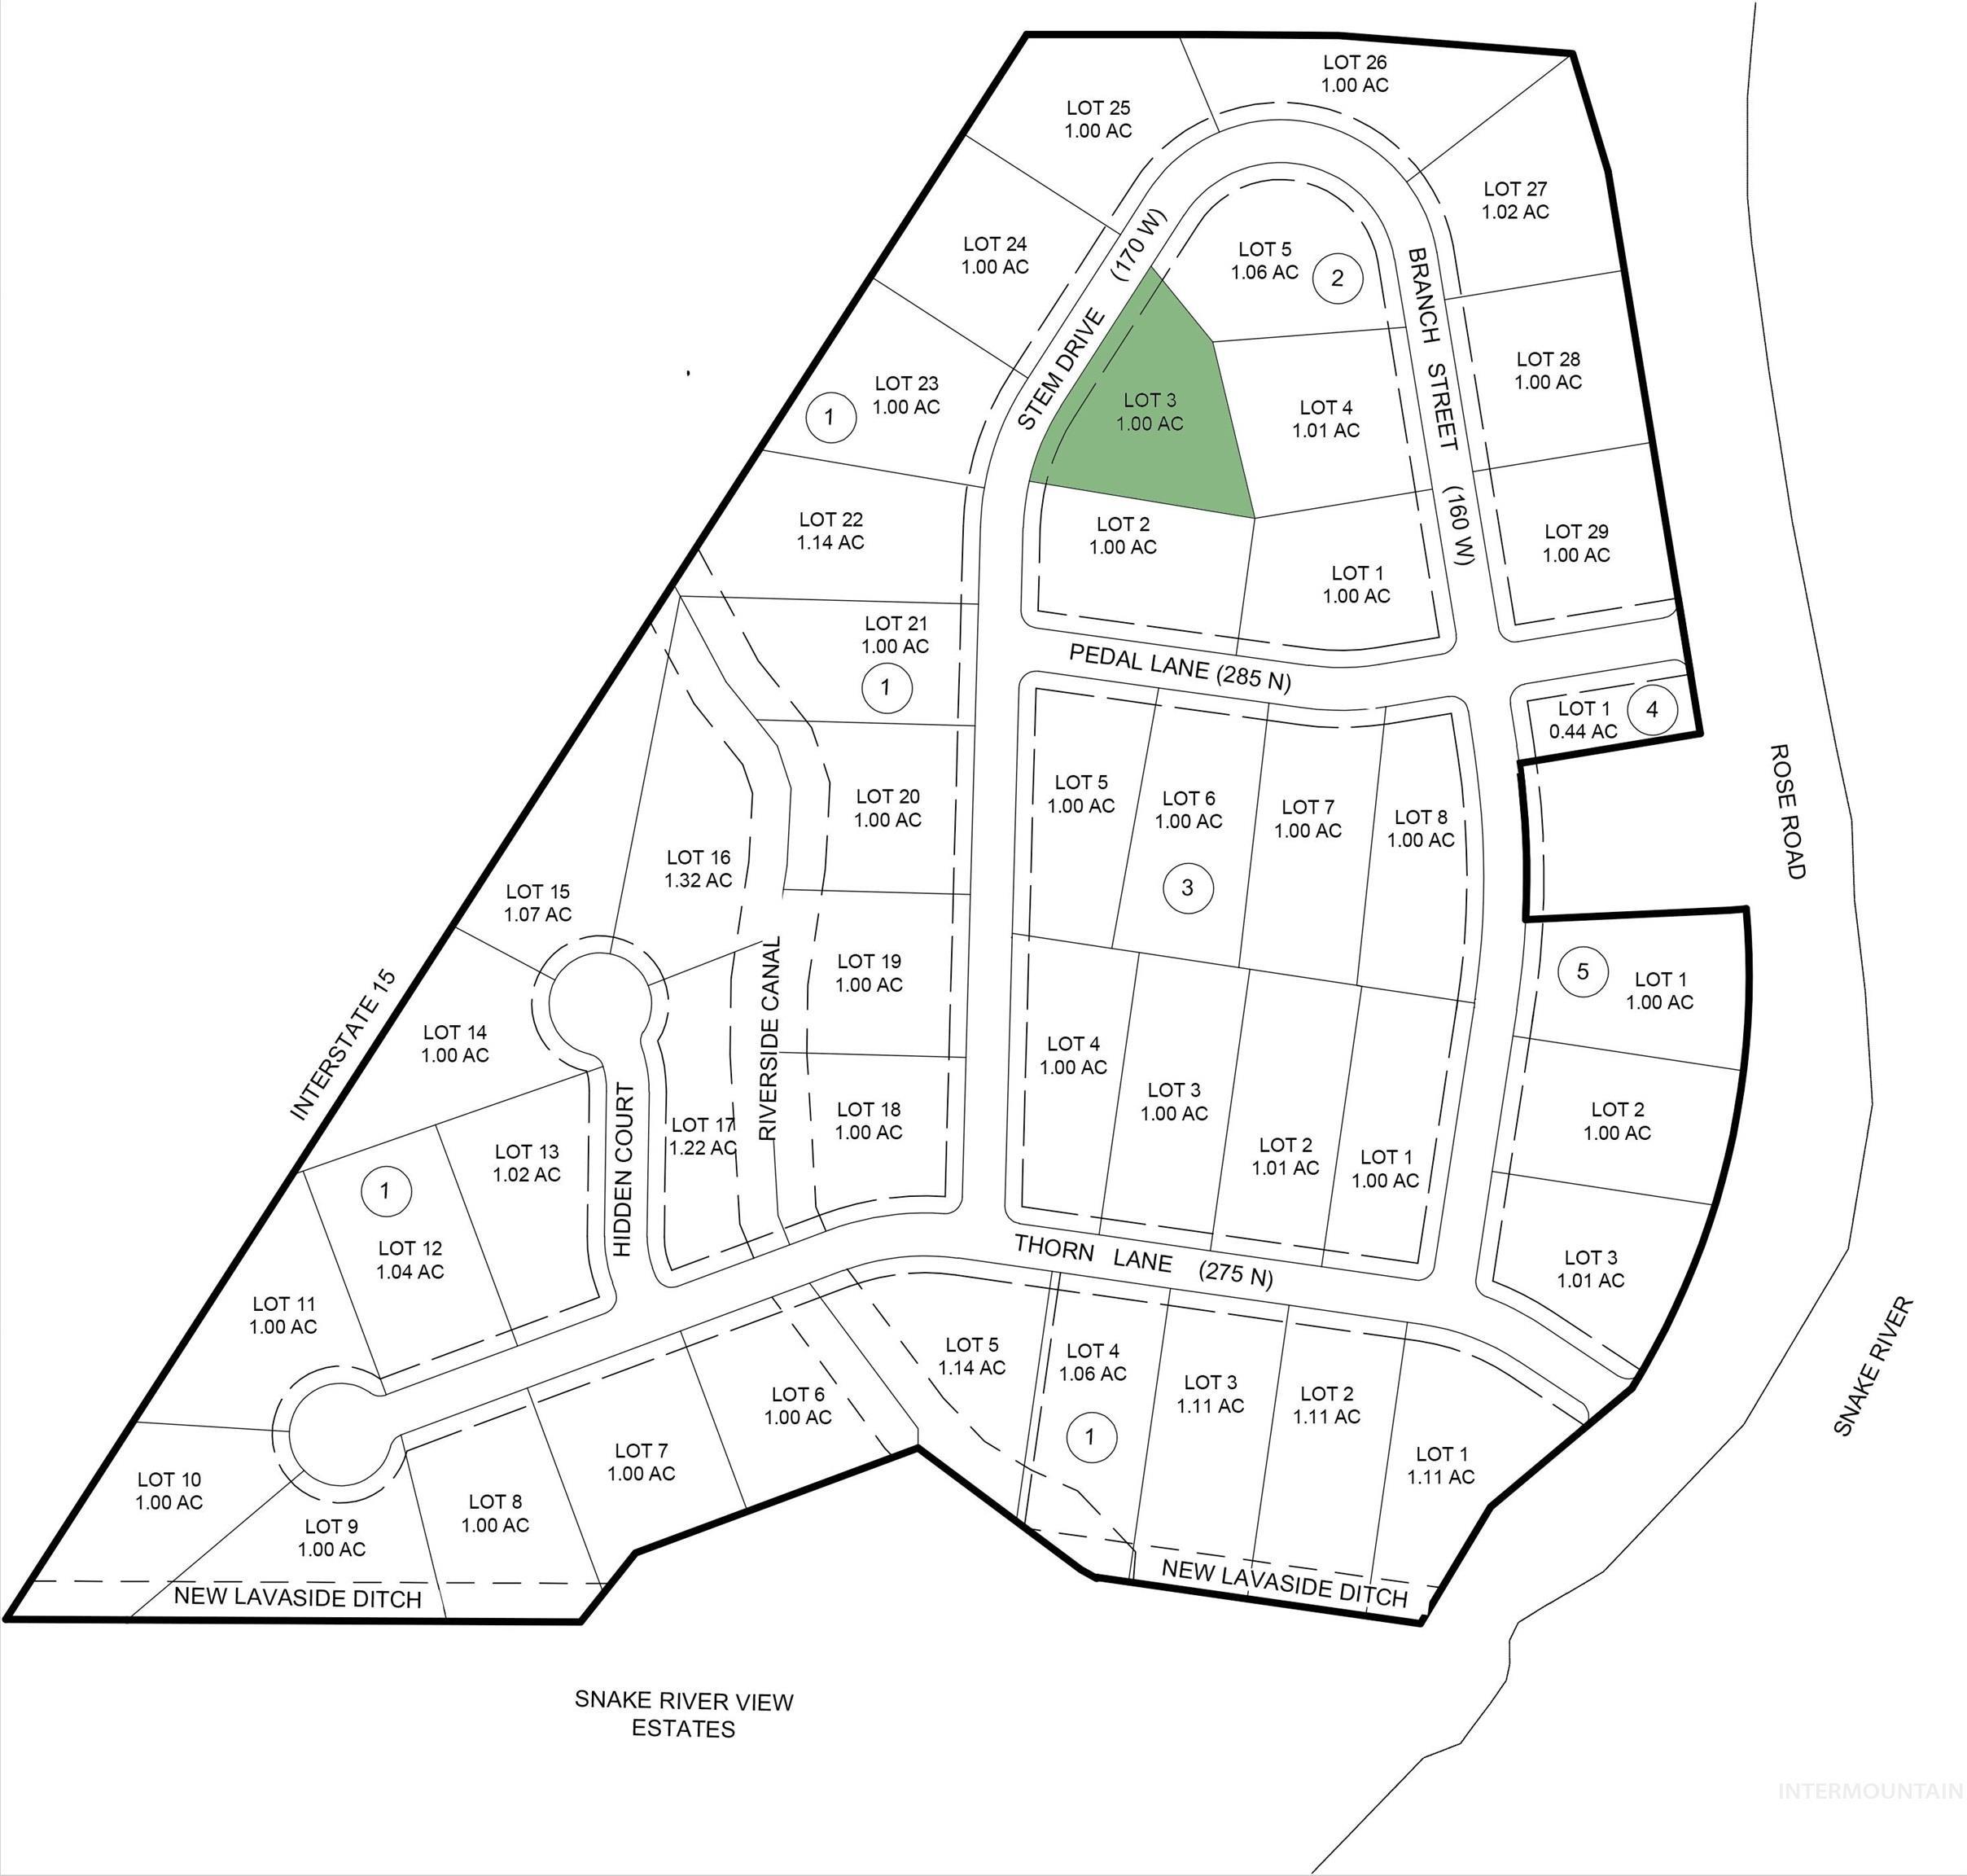 Property Image for Tbd Block 2 Lot 3